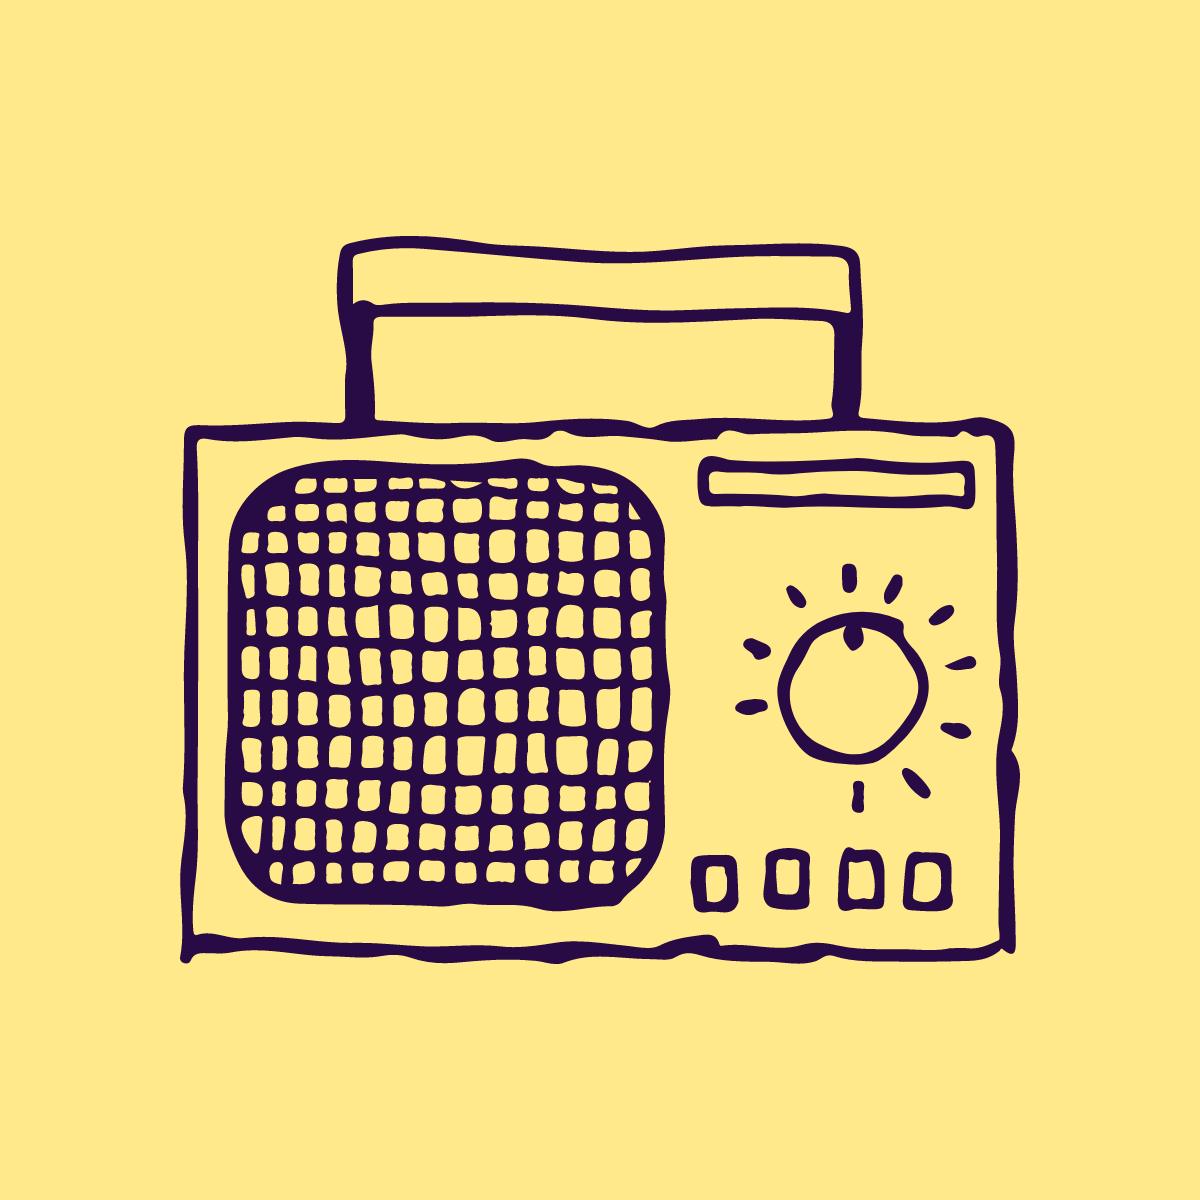 Radio cassette player sketch icon Royalty Free Vector Image